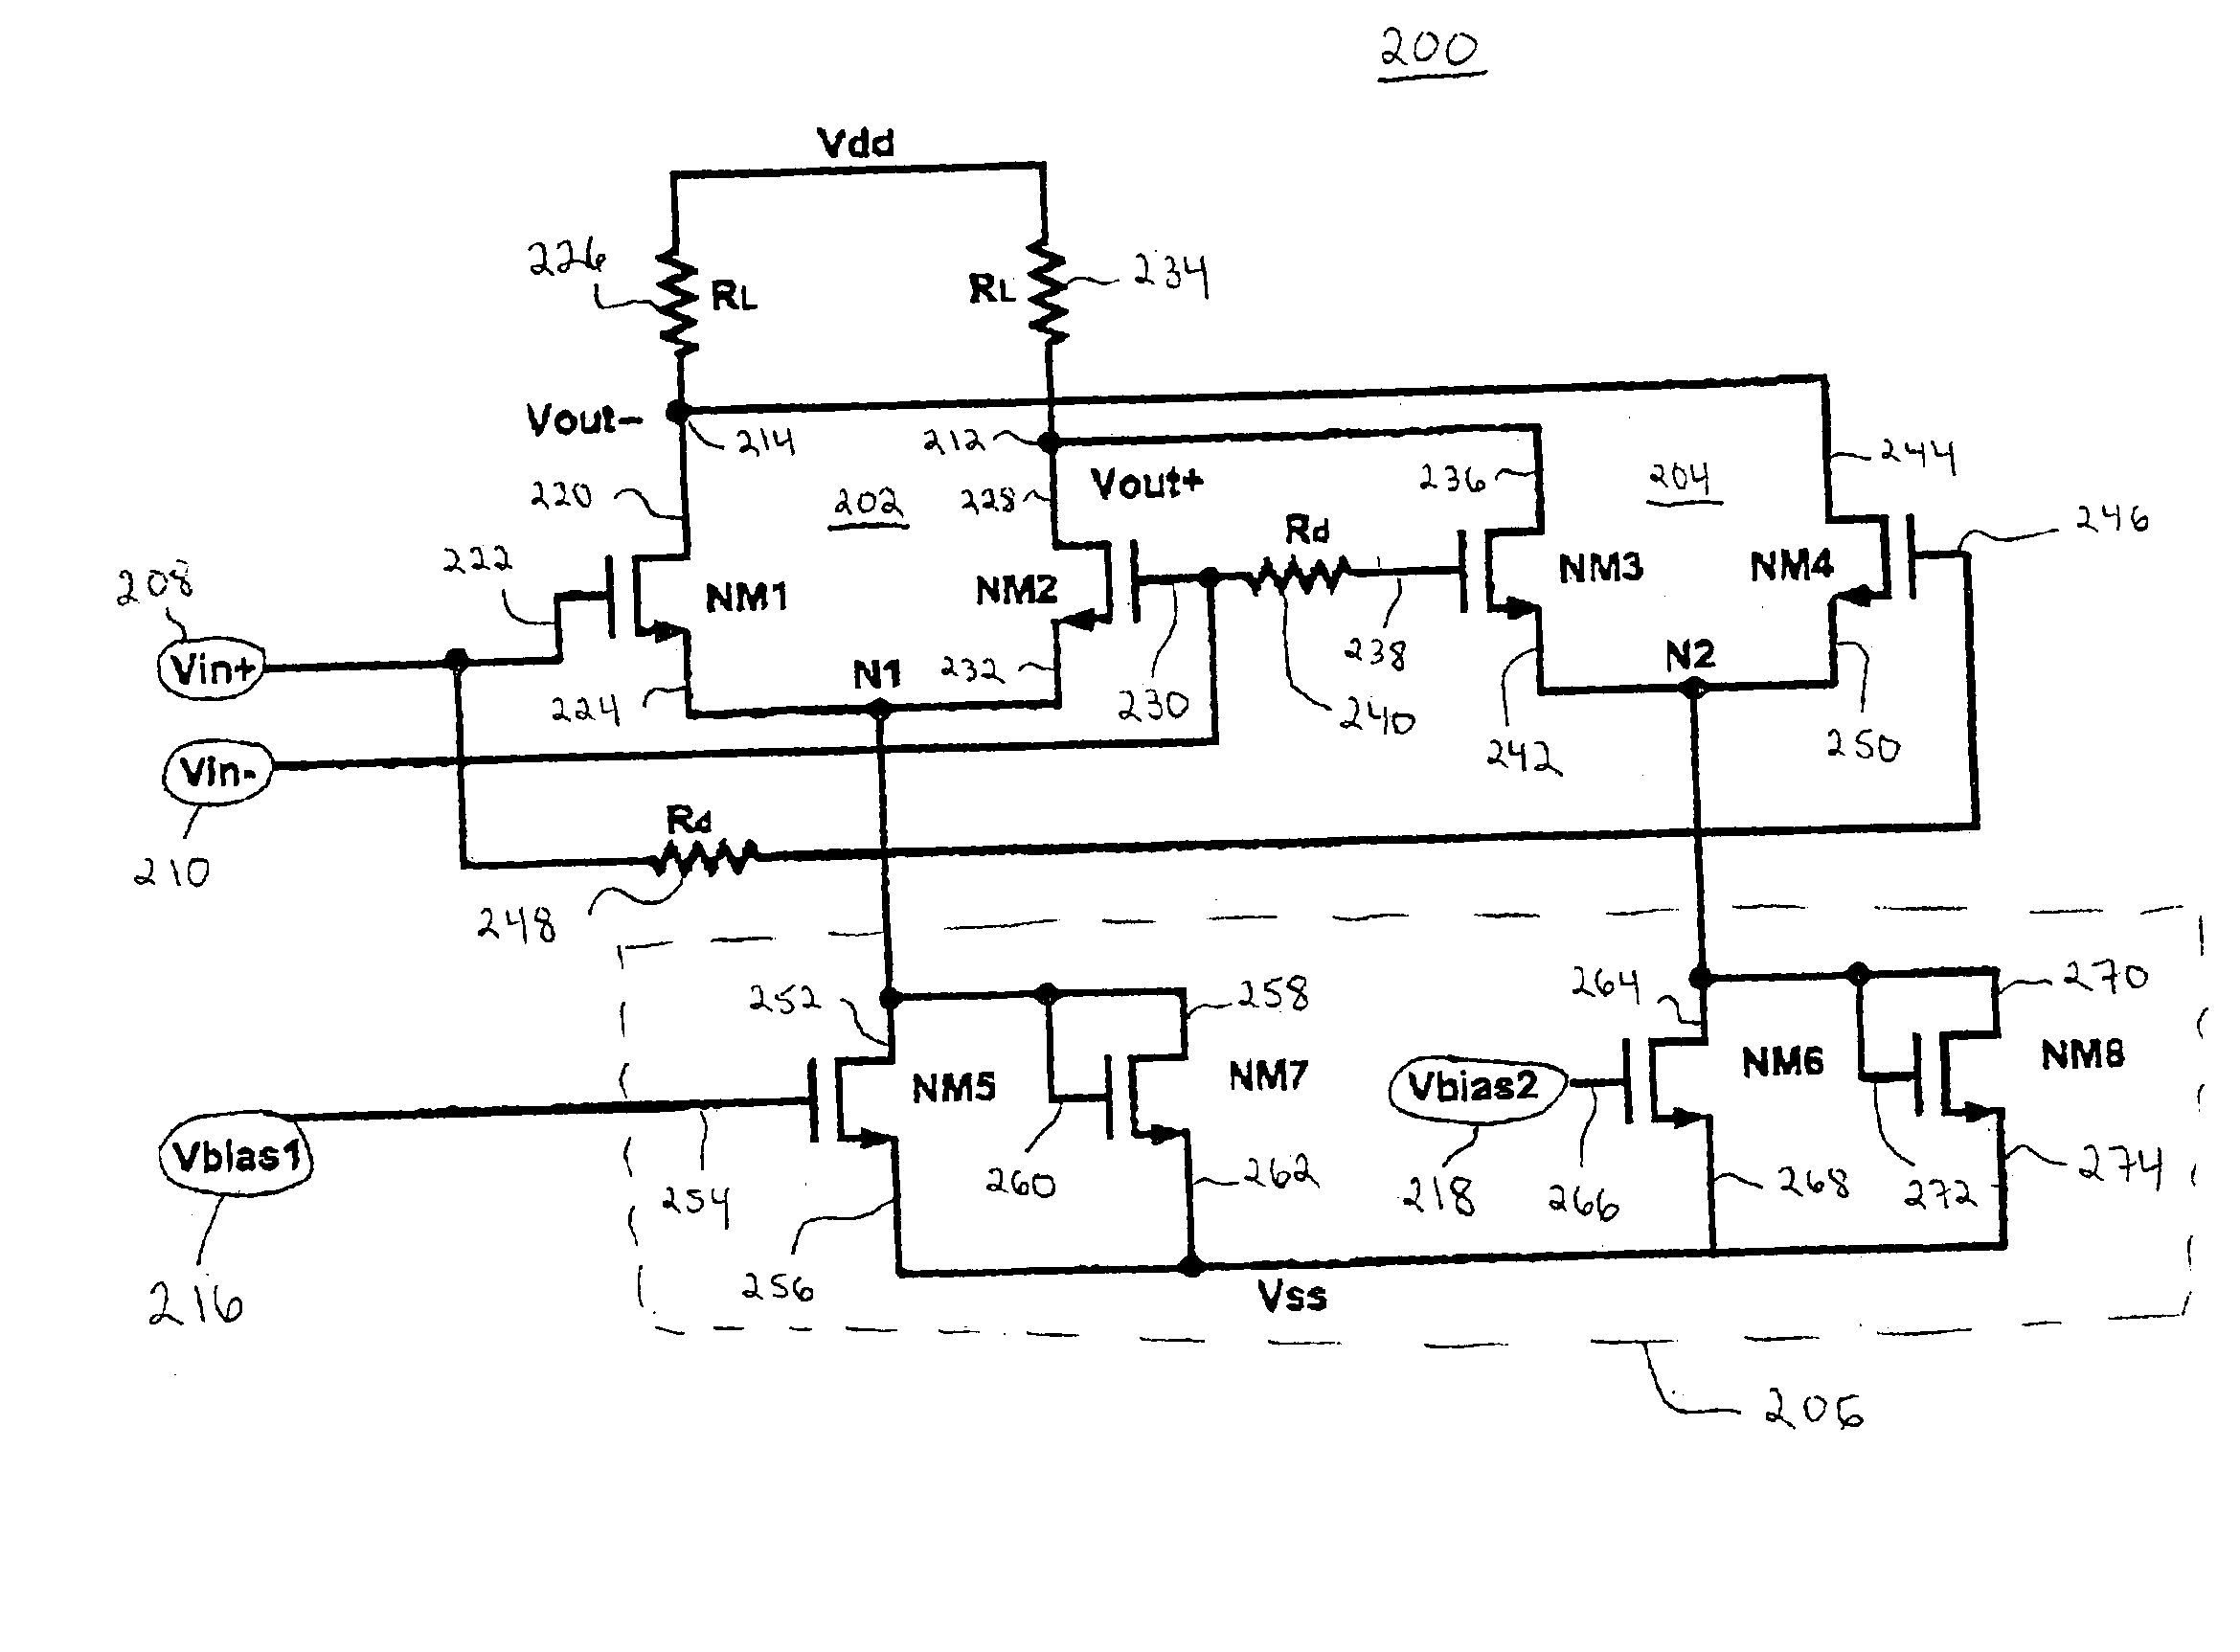 Circuit with voltage clamping for bias transistor to allow power supply over-voltage